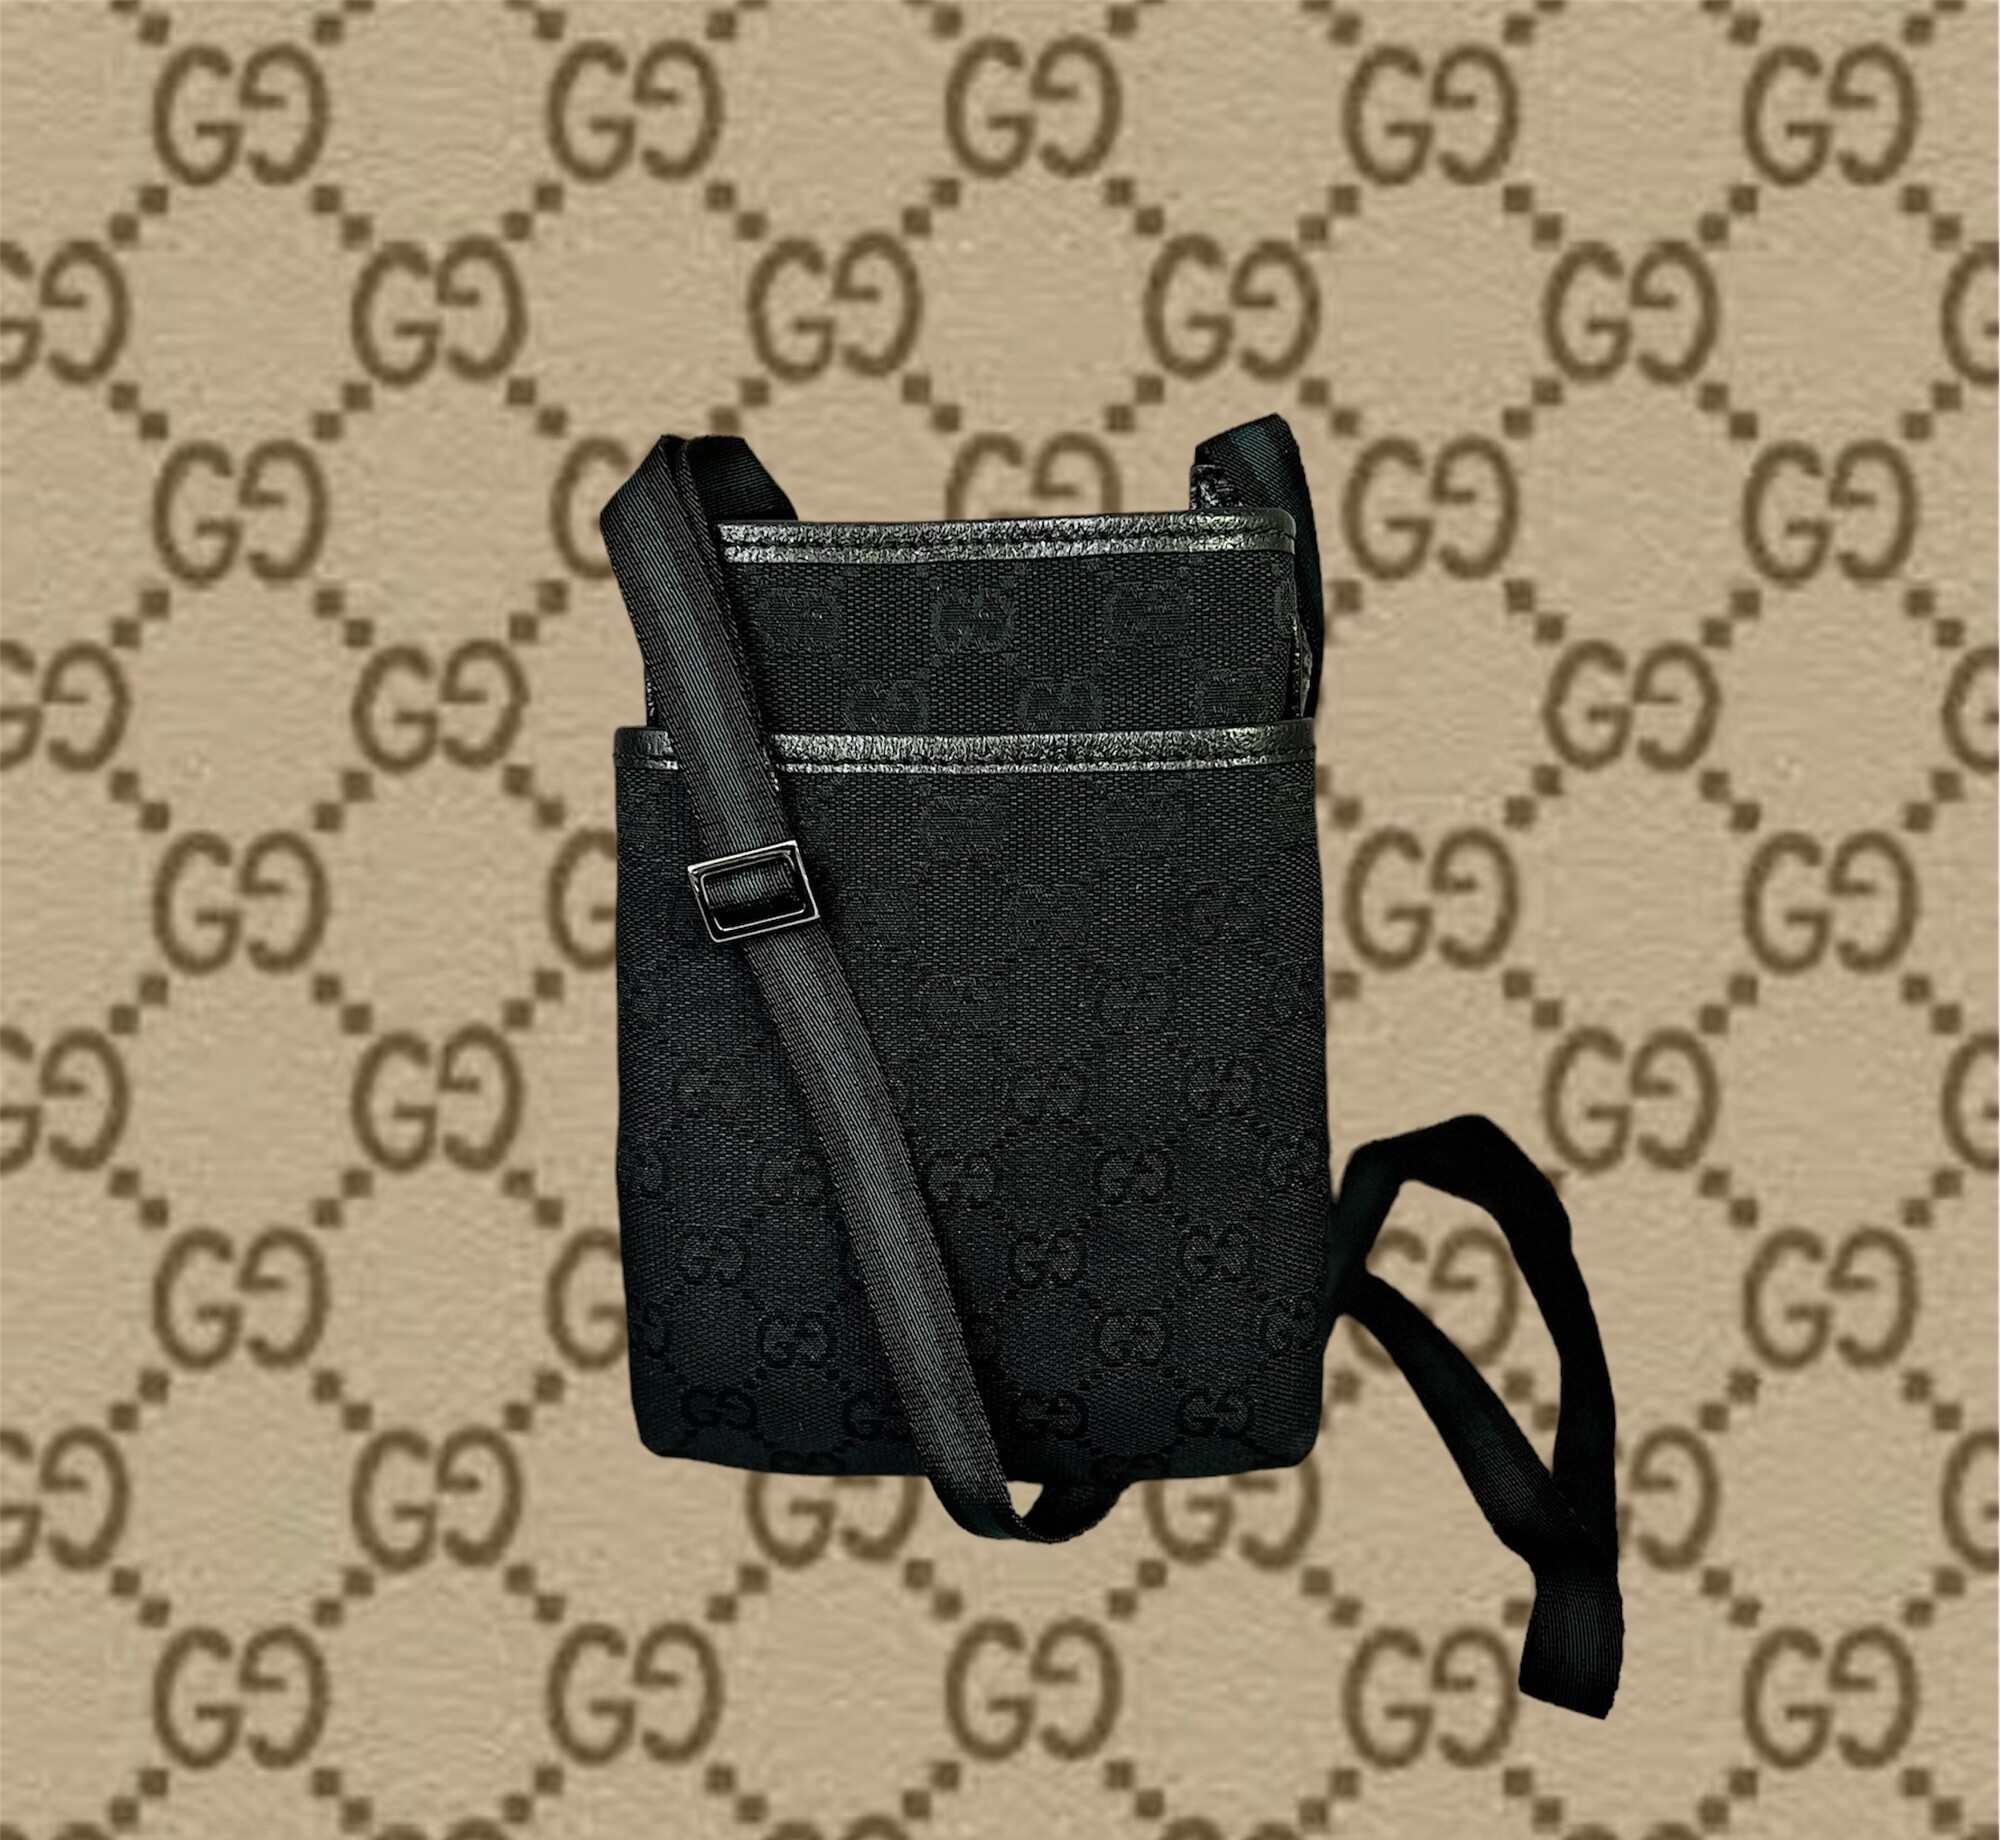 Gucci Mini Black Monogram GG Sherry Web crossbody
Material: CANVAS x LEATHER
Color: BLACK
Approximate SizeWx13cm(5.1inch) Hx18cm(7.1inch) Dx2cm(0.8inch)
Handle Drop / Strap DropHandle Drop : - / Strap Drop : 54cm(21.3inch)
Outside Pocket
Stamp / Serial Number 141863 001998
Made in ITALY
In Excellent Condition
Easily fits large cellphones
A FUN and EASY GUCCI CROSSBODY

EXCELLENT CONDITION
(9/10 or A)